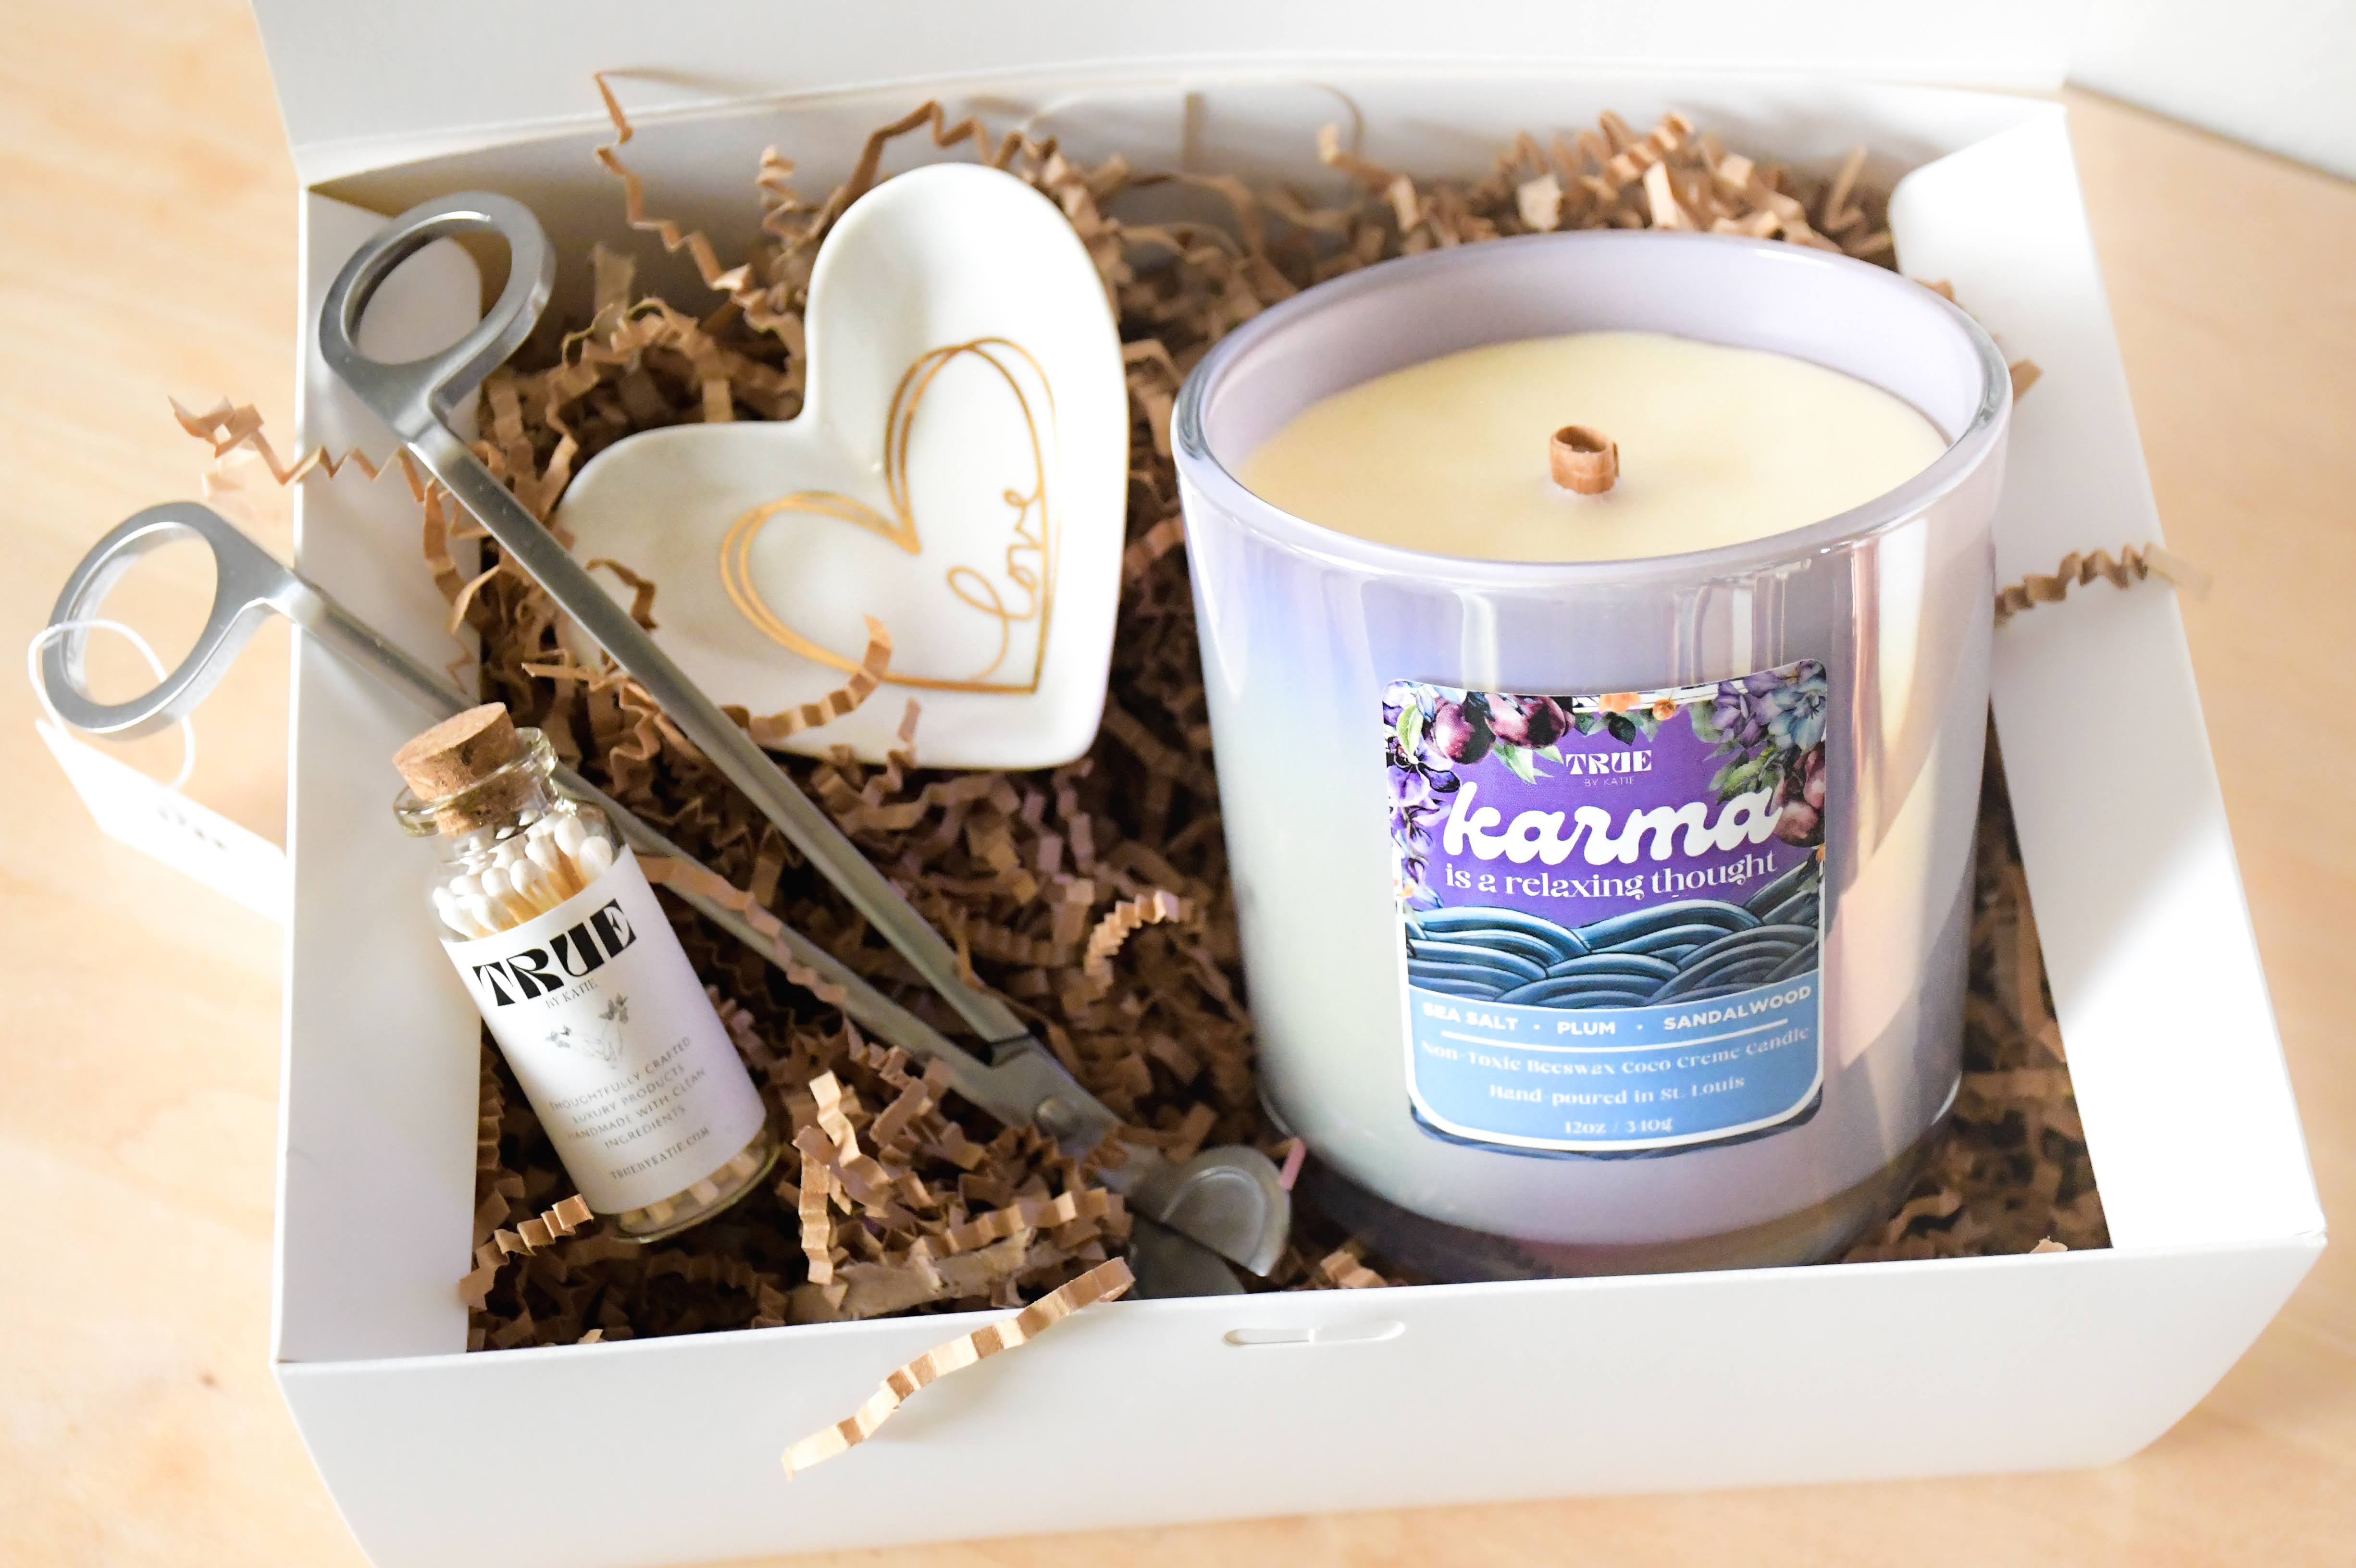 Karma is a Relaxing Thought Gift Box Sets